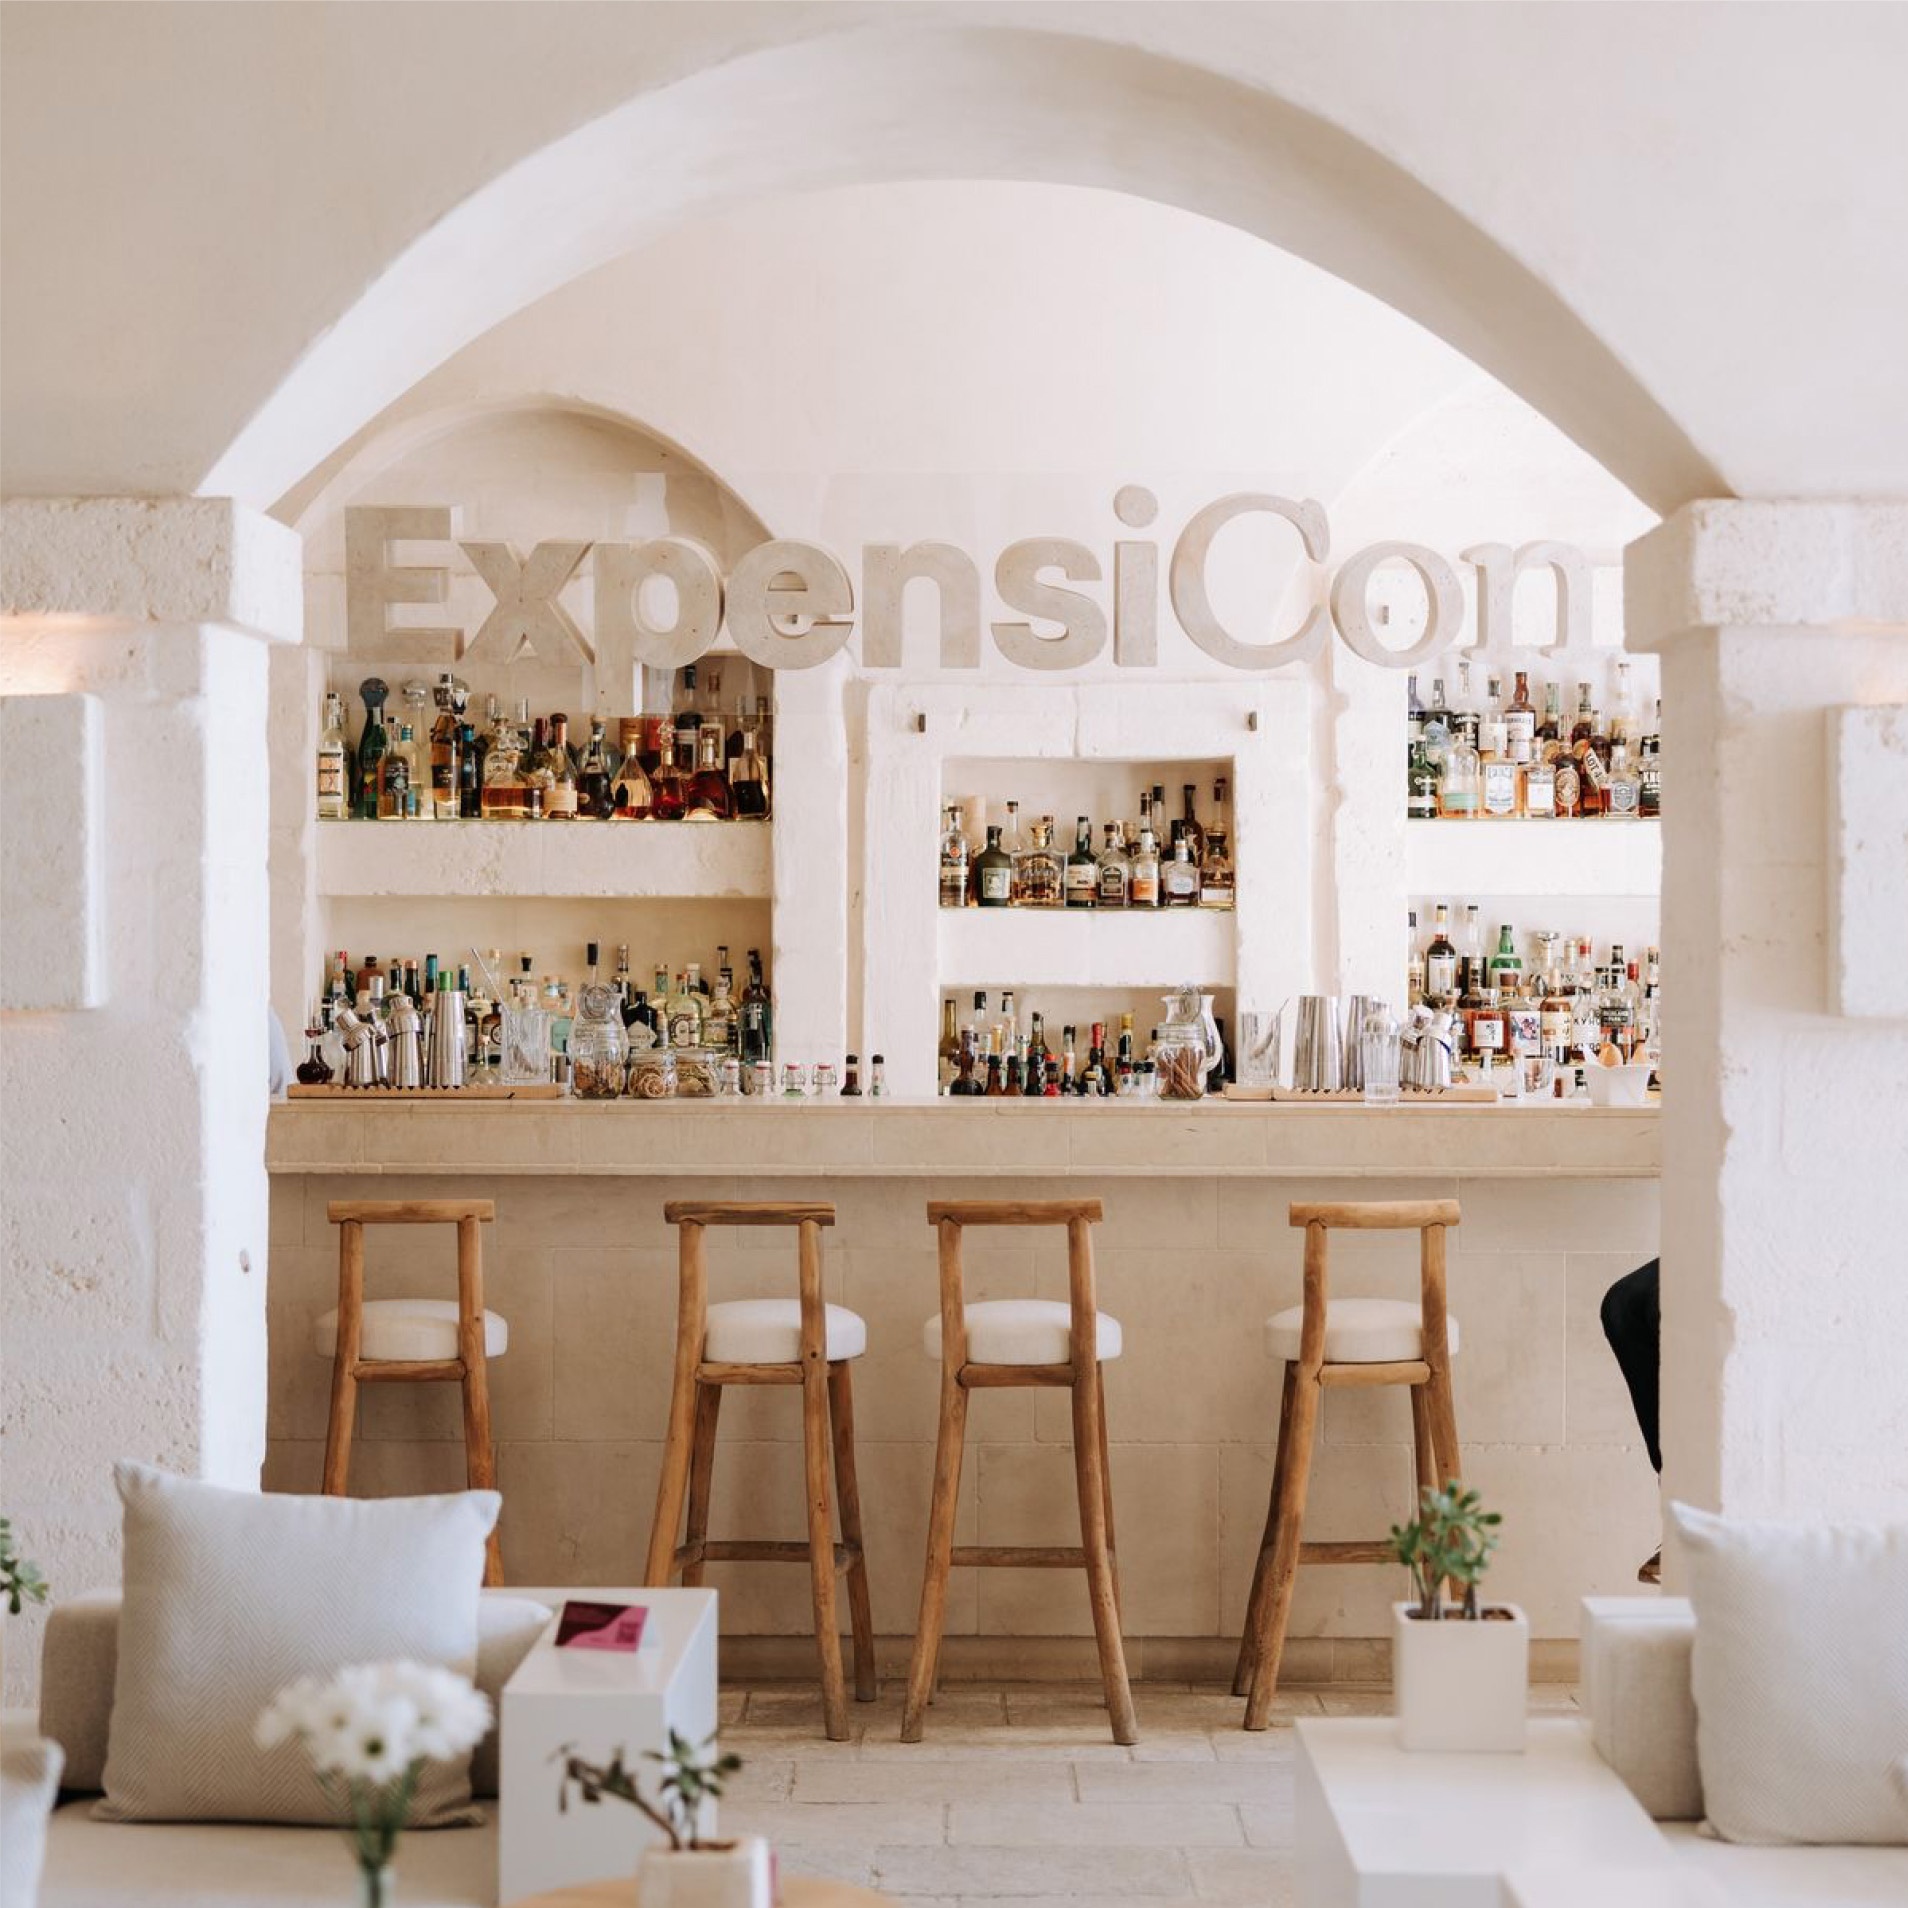 Bar with the Expensicon logo under an arch